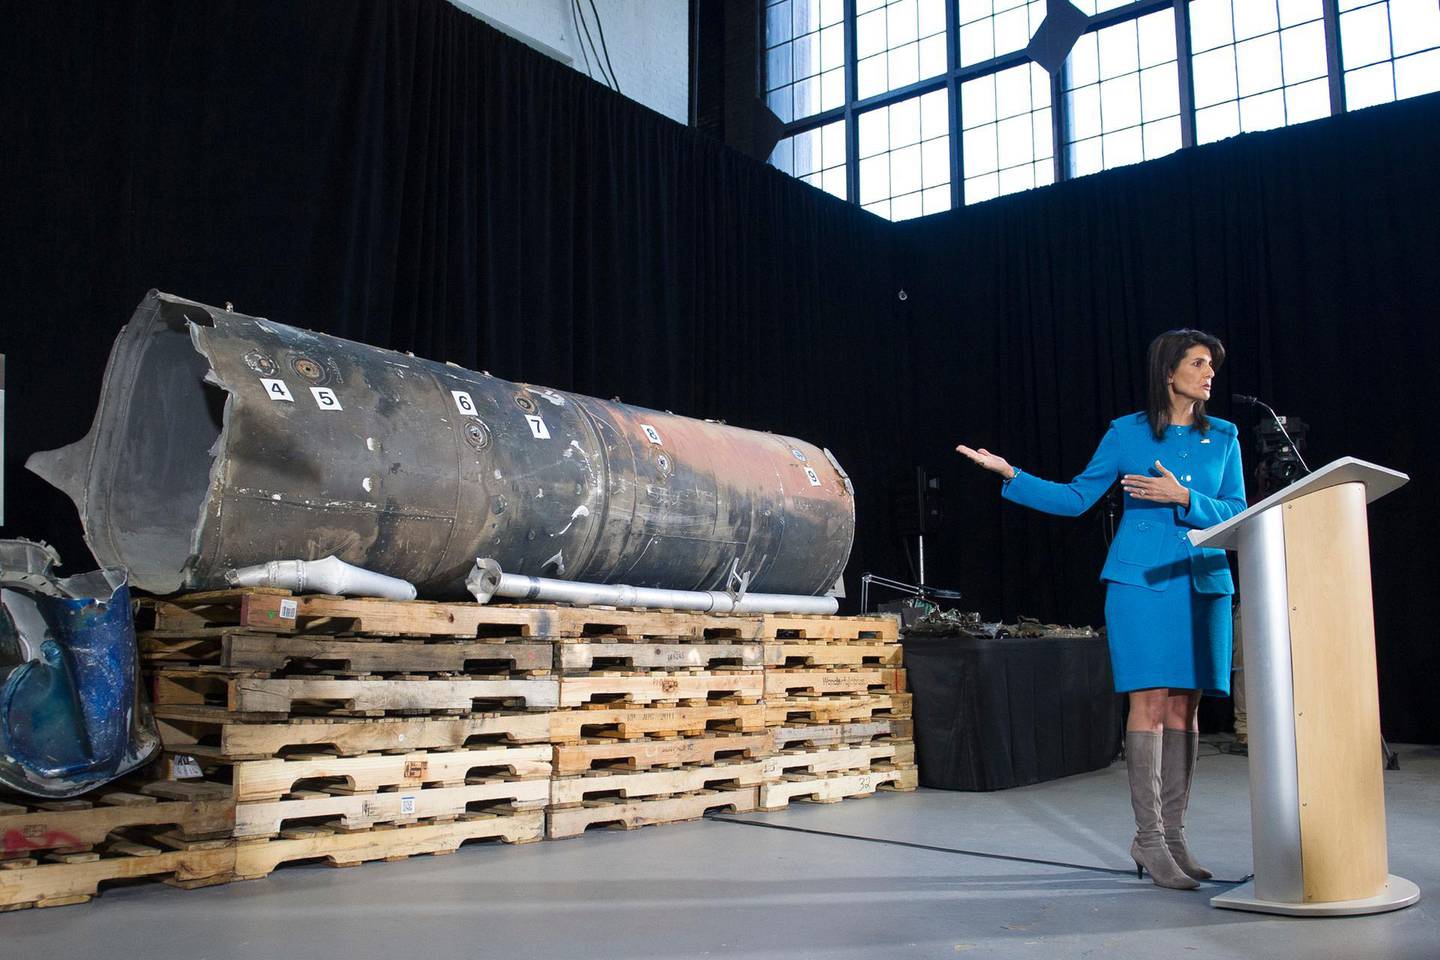 U.S. Ambassador to the U.N. Nikki Haley gestures as she speaks in front recovered segments of an Iranian rocket during a press briefing at Joint Base Anacostia-Bolling, Thursday, Dec. 14, 2017, in Washington. Haley says "undeniable" evidence proves Iran is violating international law by funneling missiles to Houthi rebels in Yemen. Haley unveiled recently declassified evidence including segments of missiles launched at Saudi Arabia from Houthi-controlled territory in Yemen. (AP Photo/Cliff Owen)